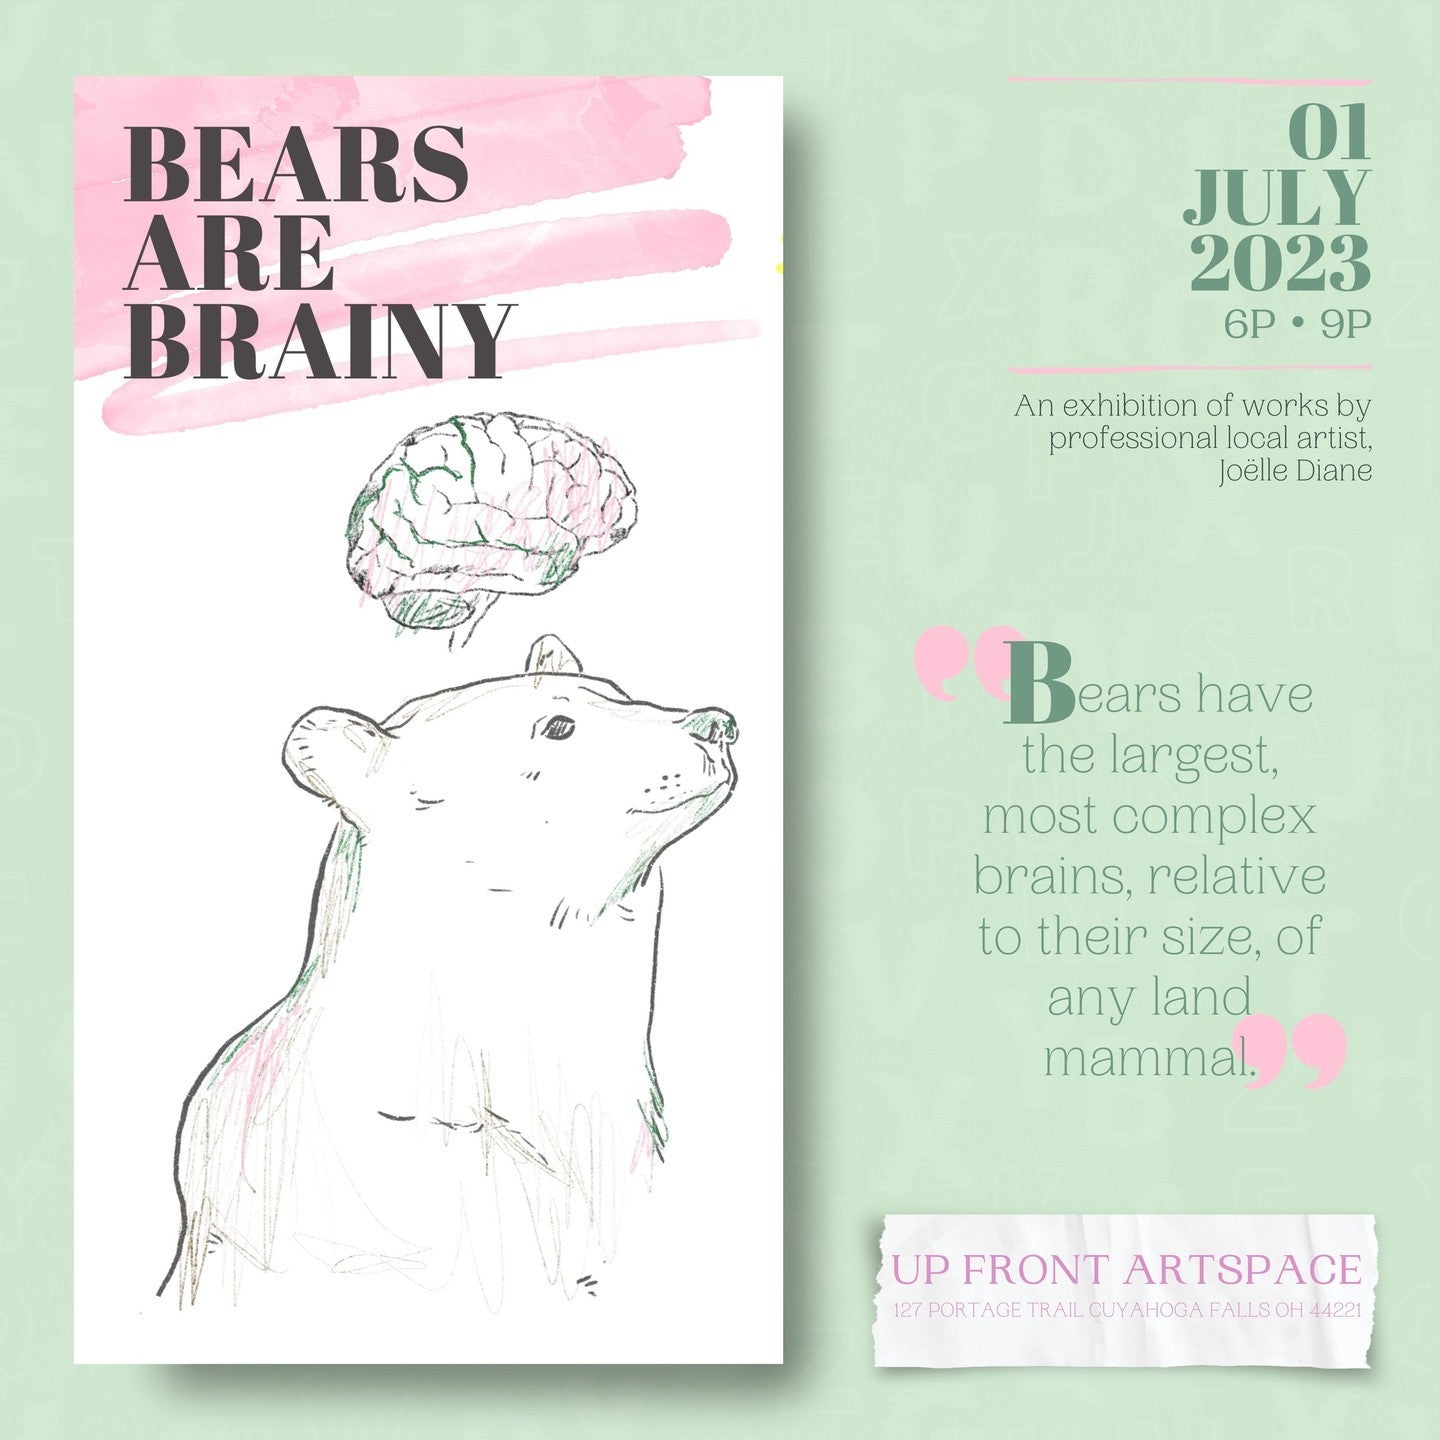 Joëlle Diane's 'Bears Are Brainy' show flyer at Up Front Art Space